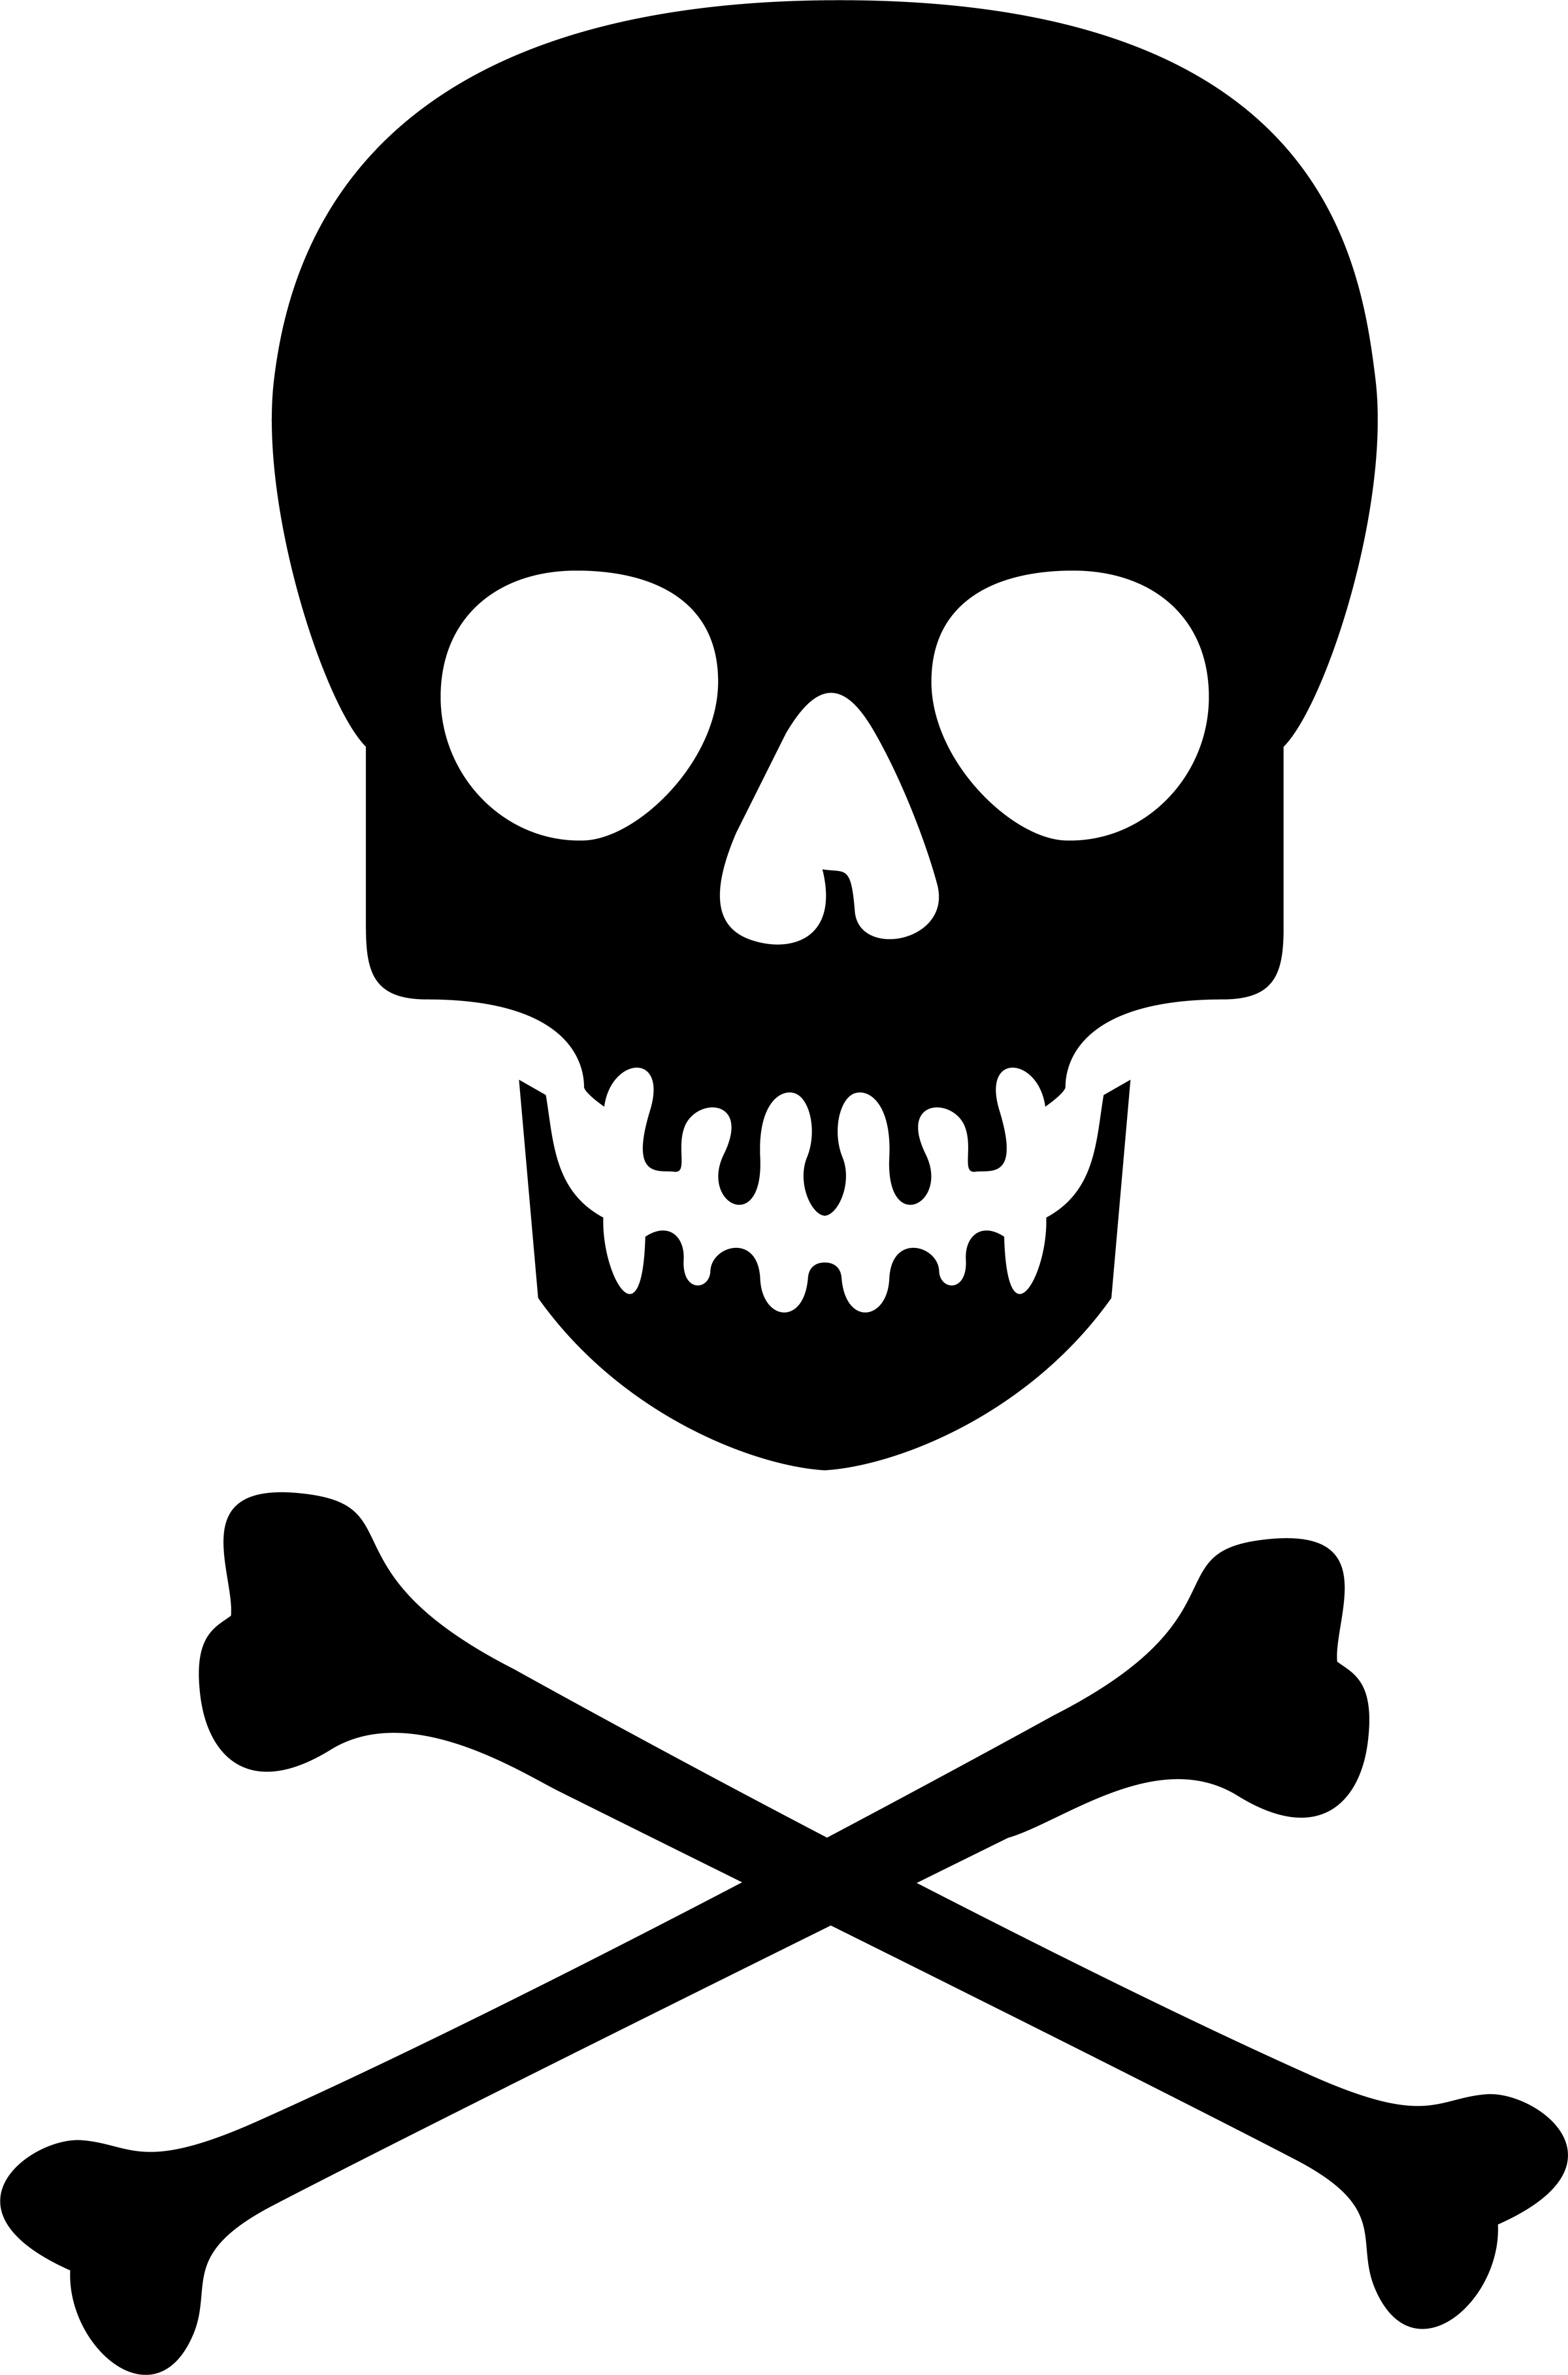 Clipart tv royalty free. Skull and crossbones png